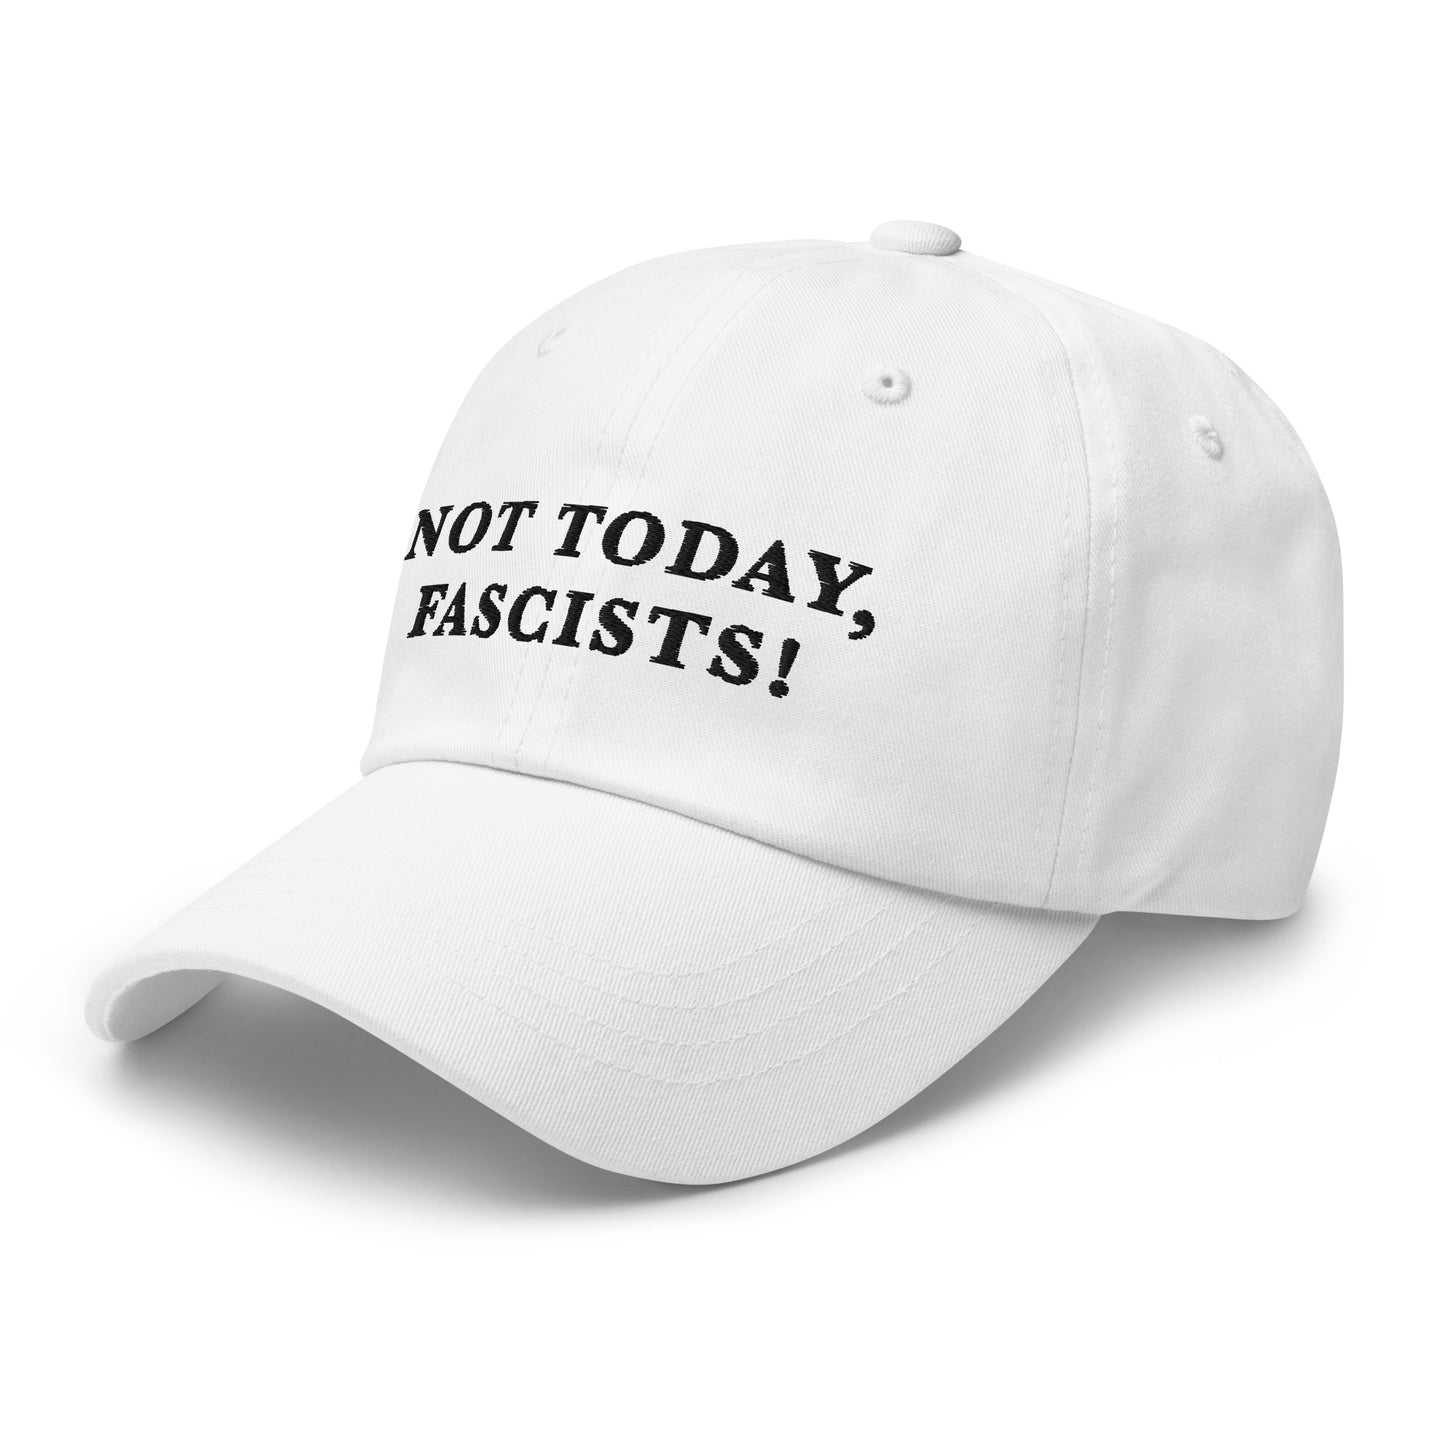 Not Today, Fascists! - Dad hat